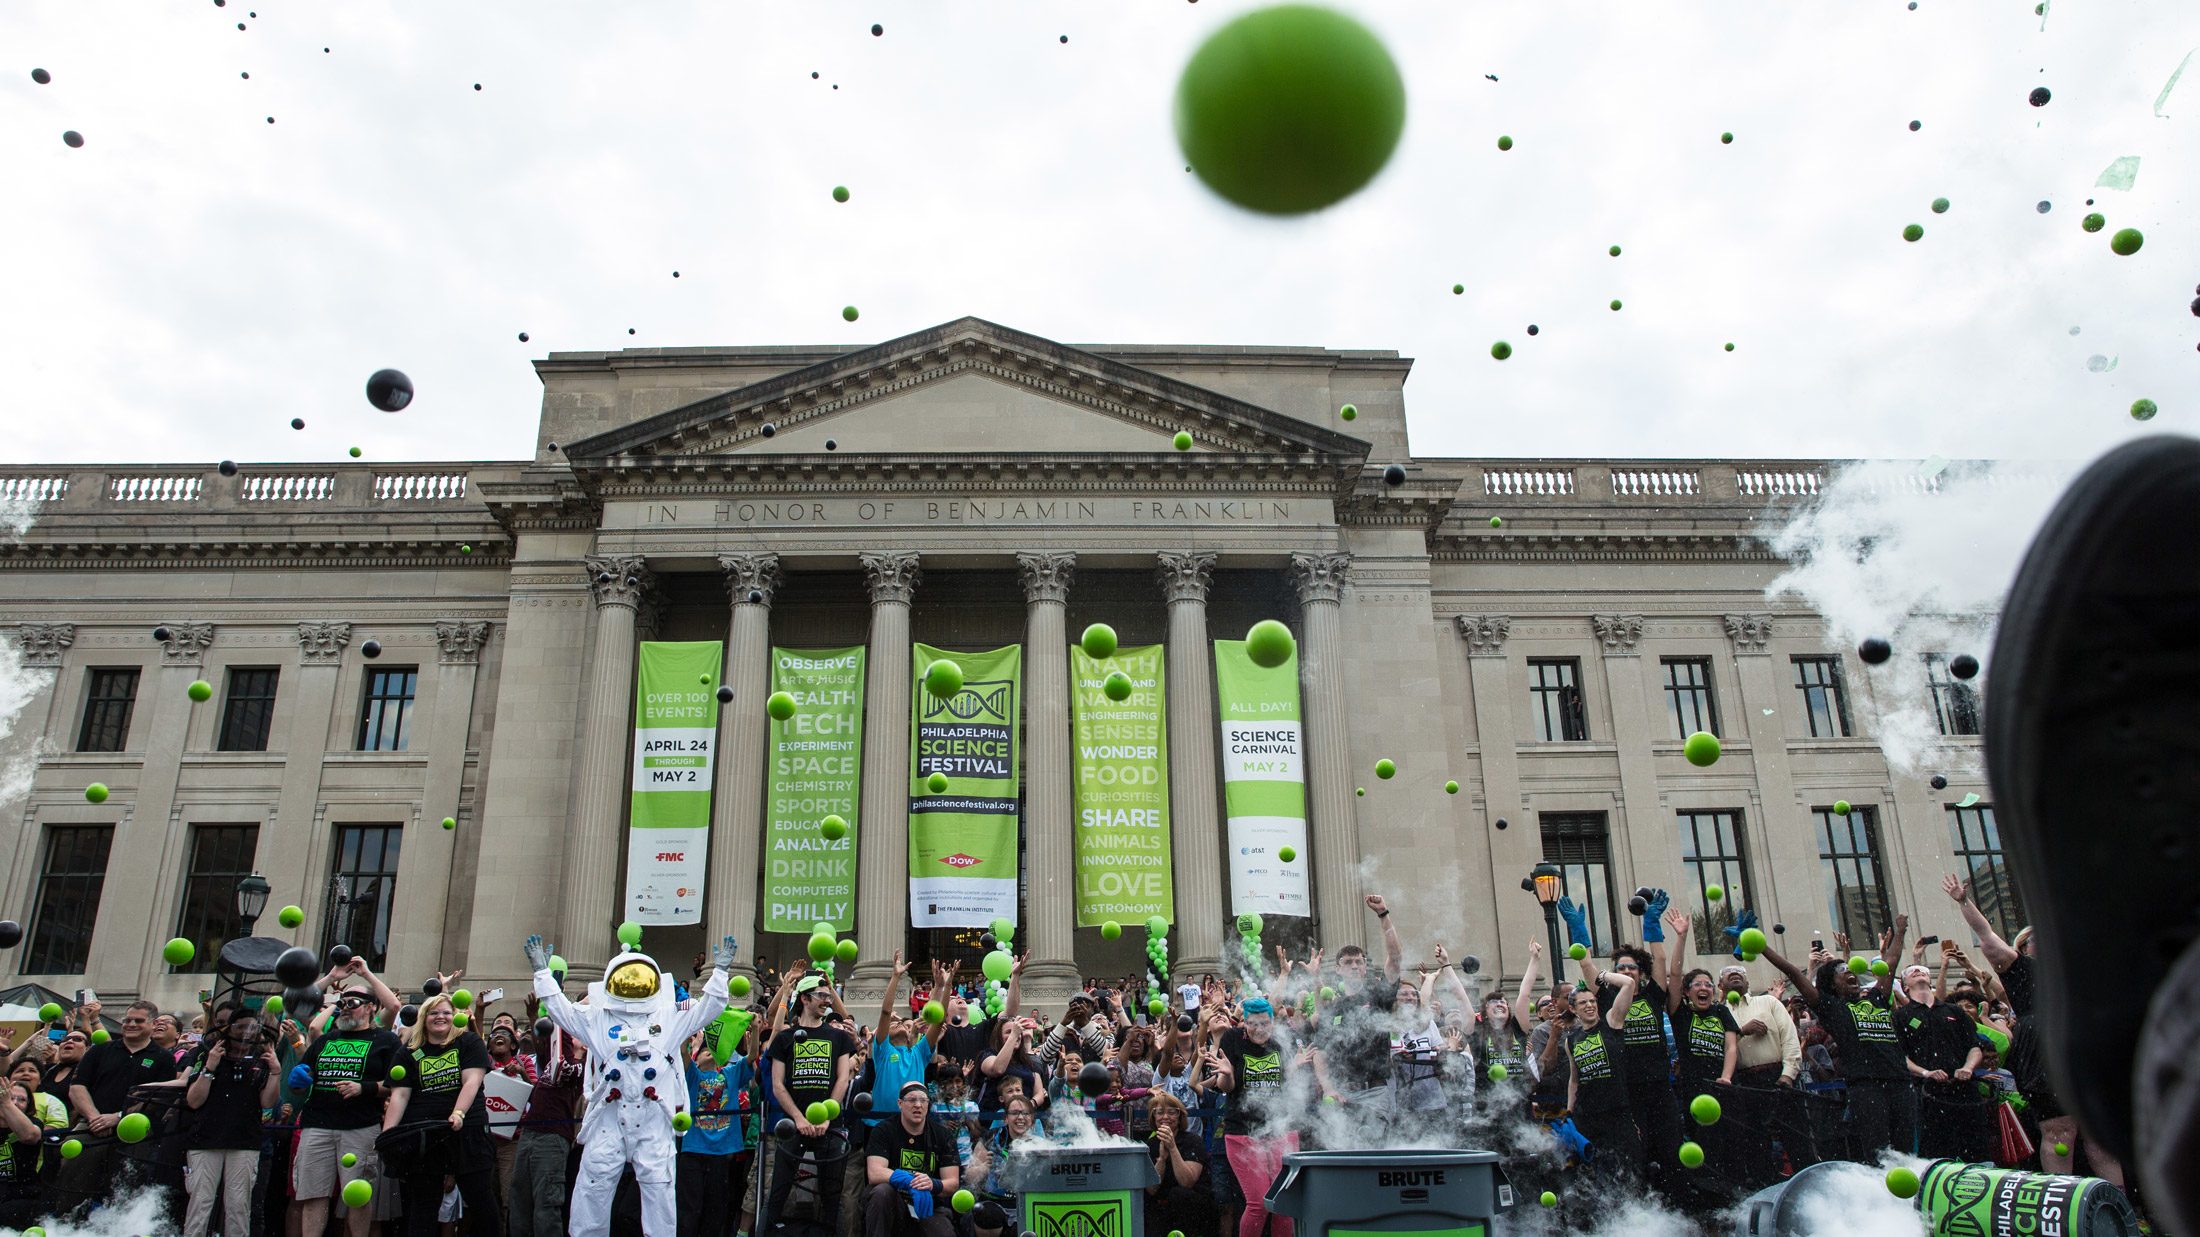 15-facts-about-philadelphia-science-festival